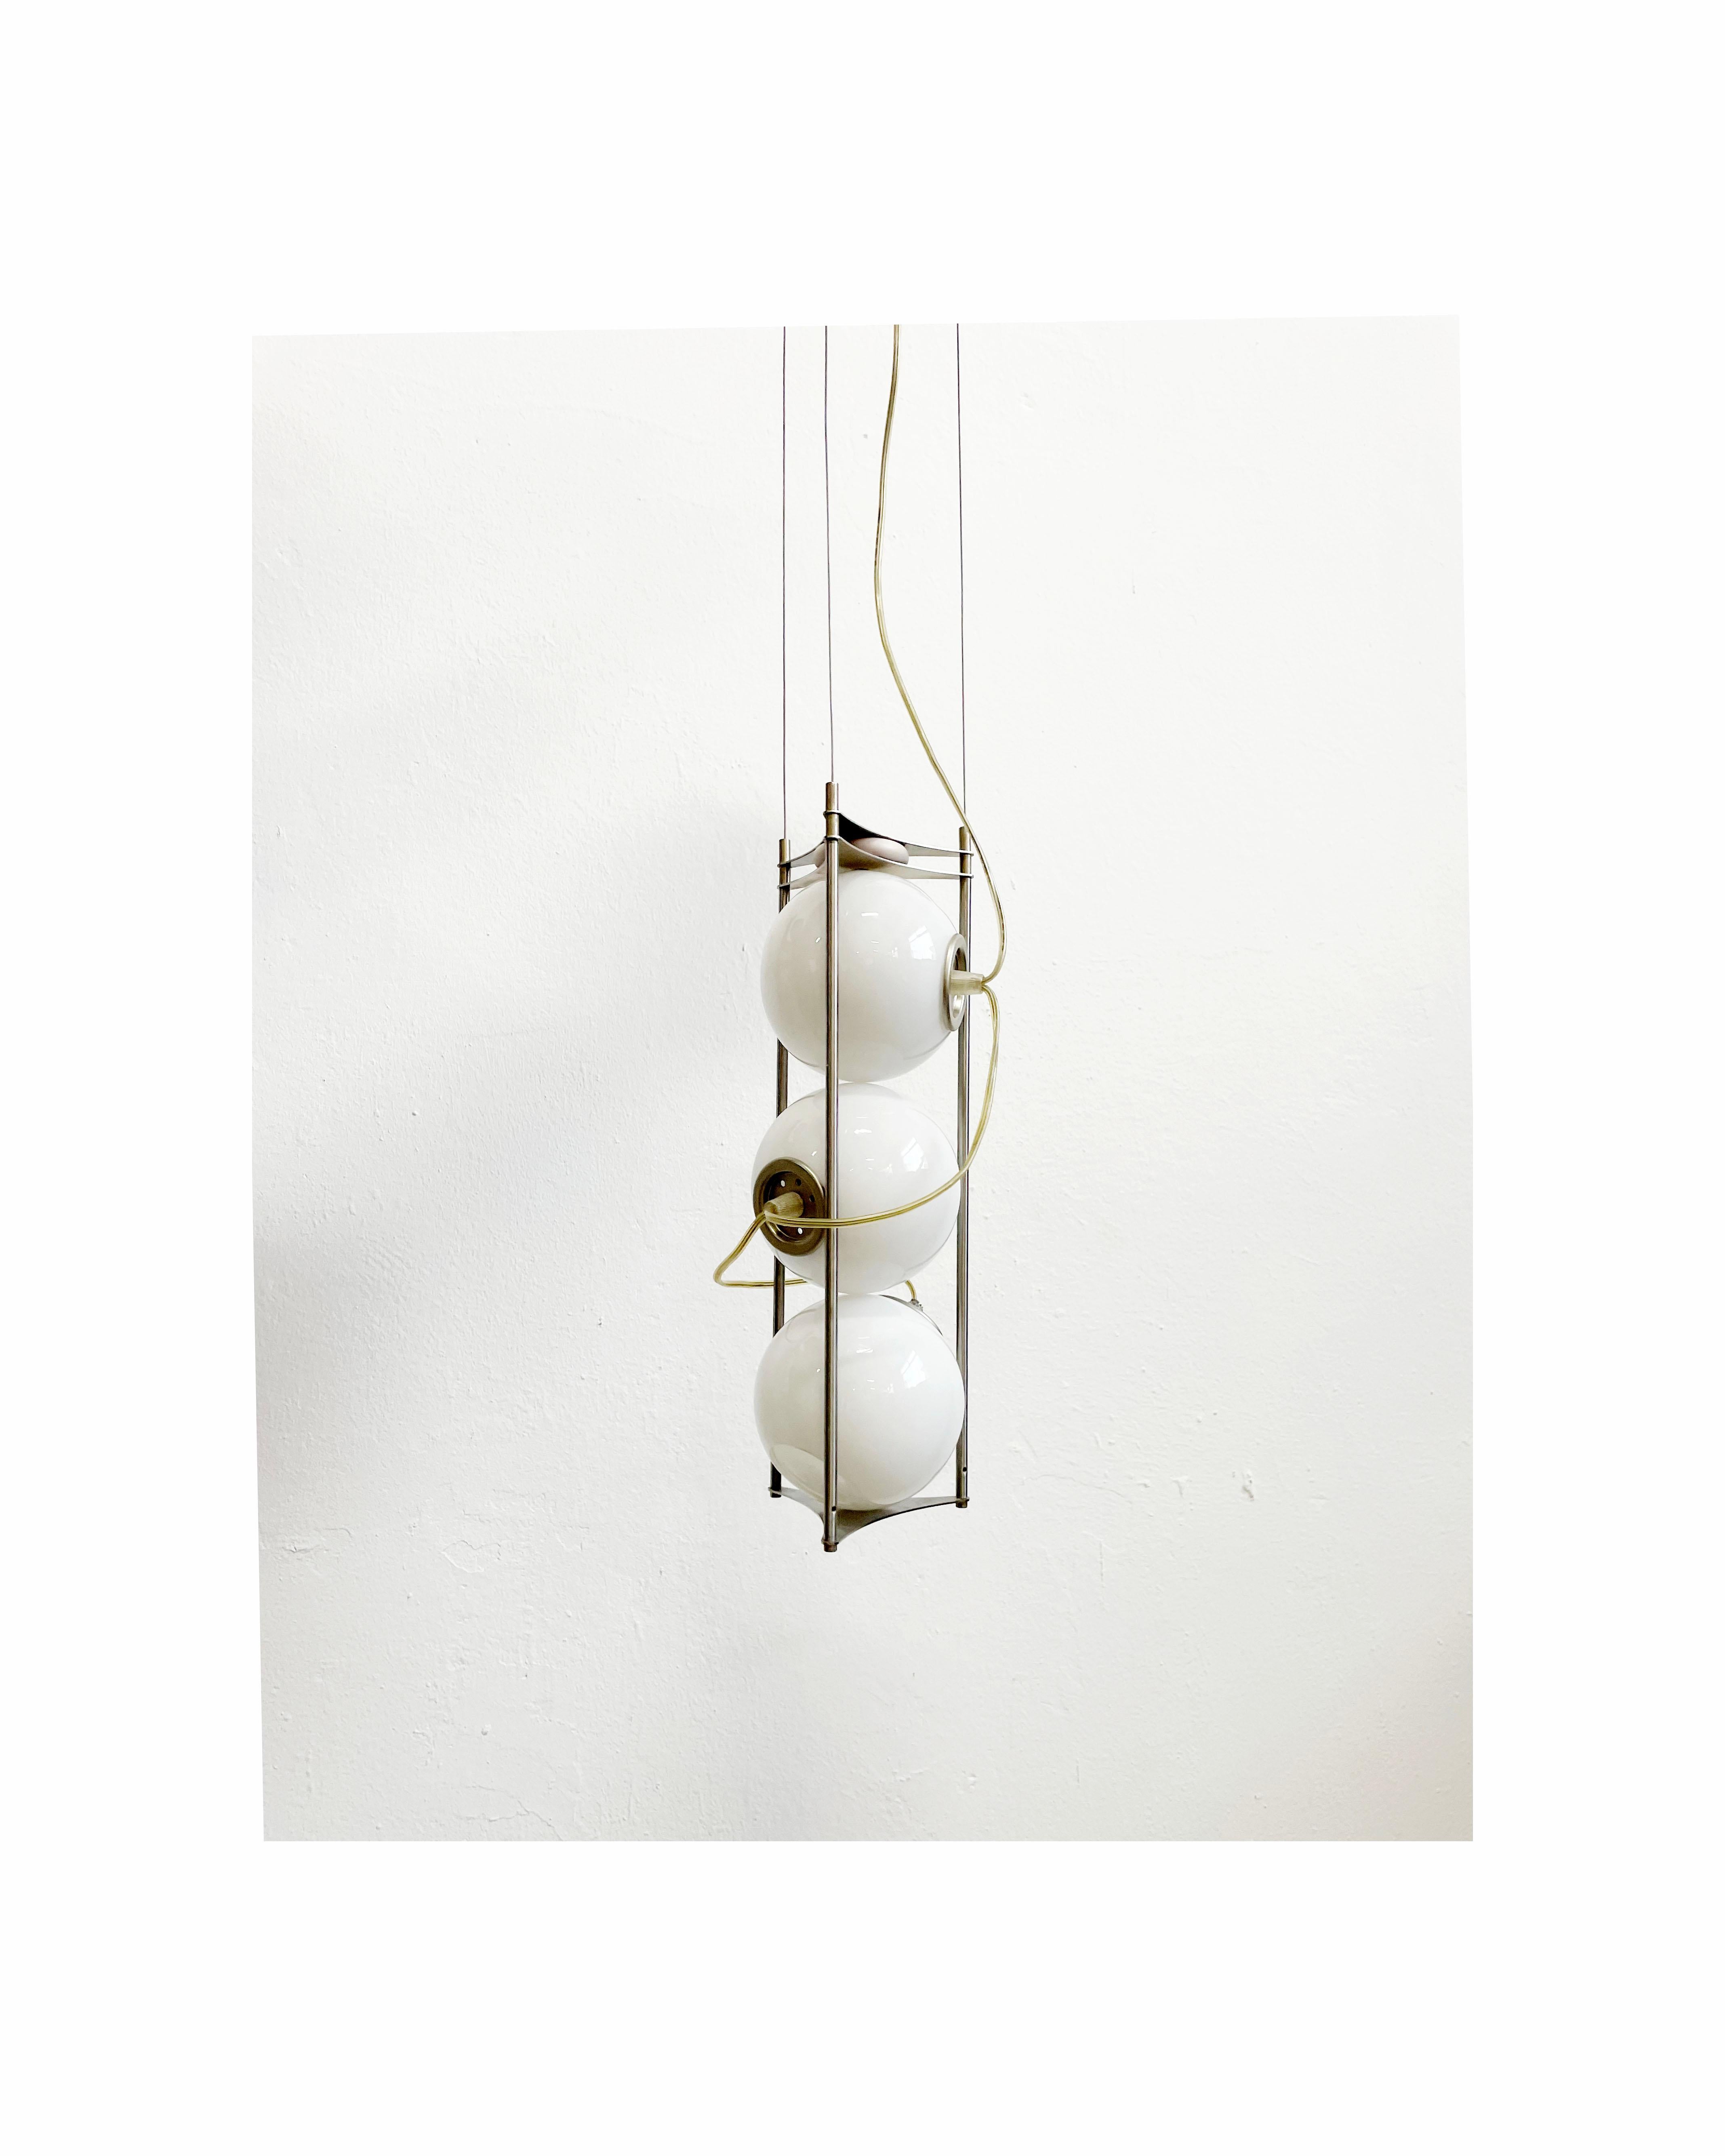 20th Century Rare Italian Suspended Light Produced by Aureliano Toso, Murano Glass, c 1990s For Sale